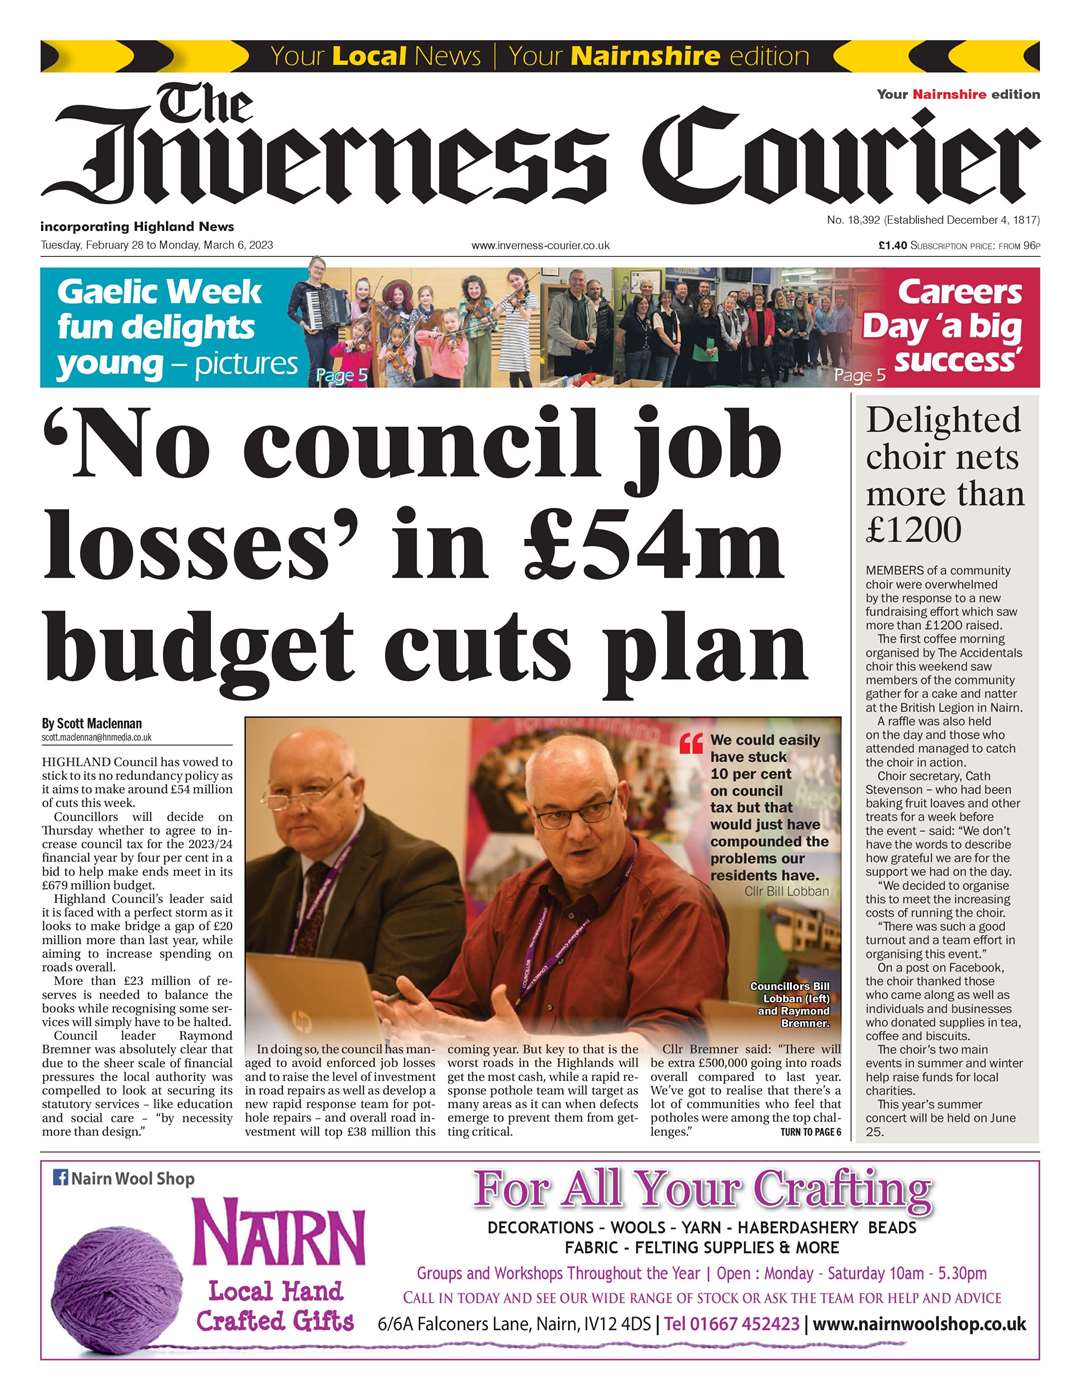 The Inverness Courier (Nairnshire edition), February 28, front page.